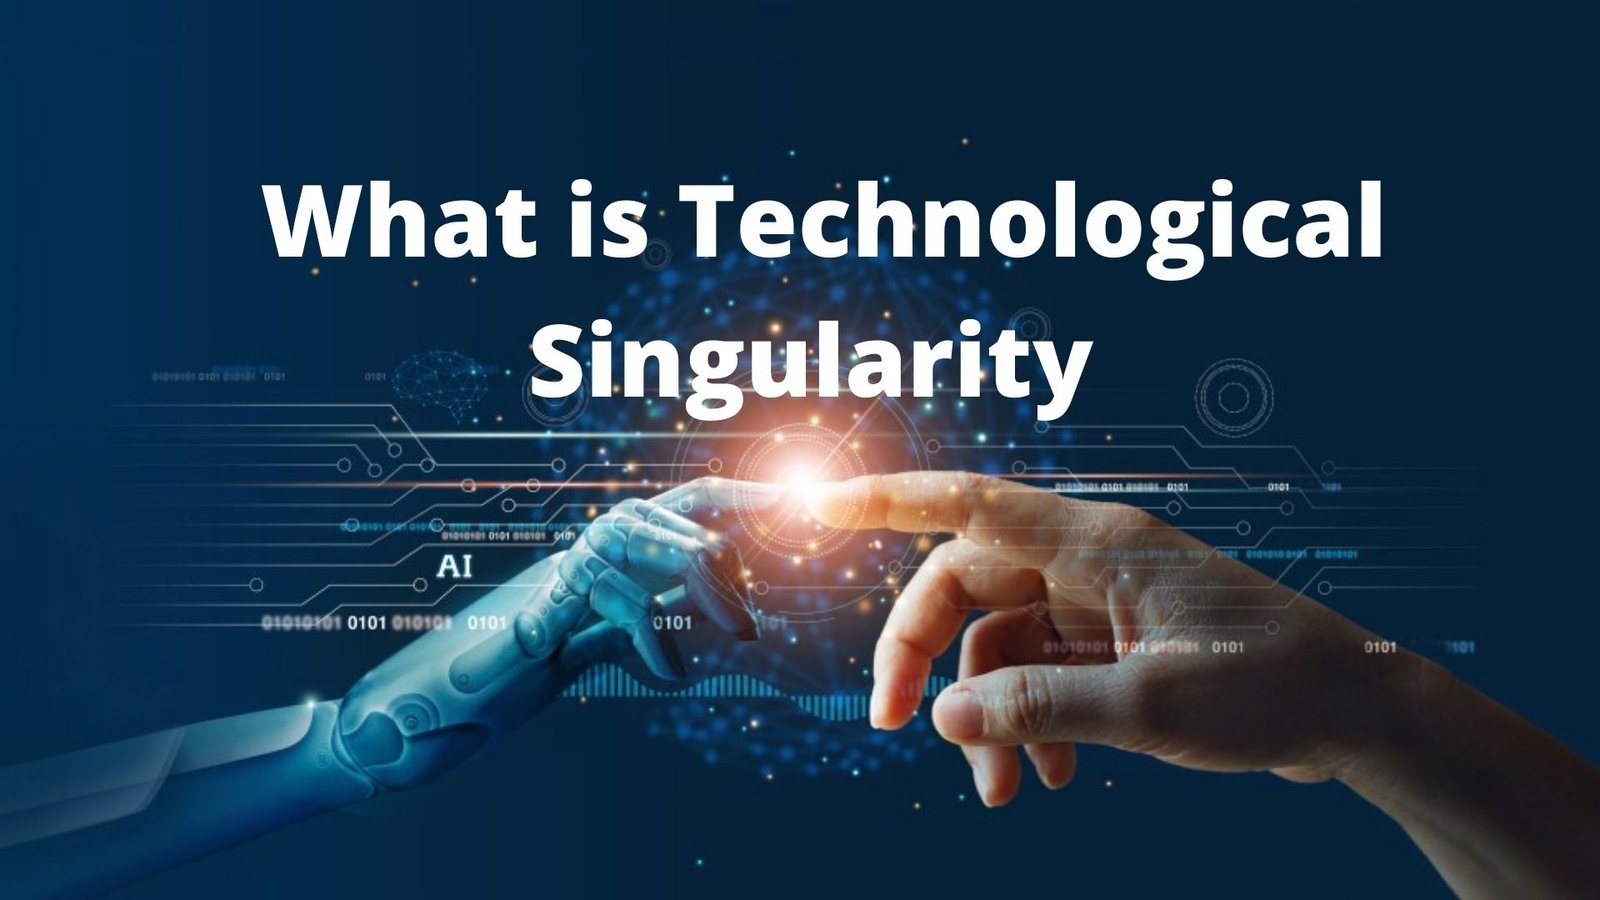 What If the Singularity Does NOT Happen?